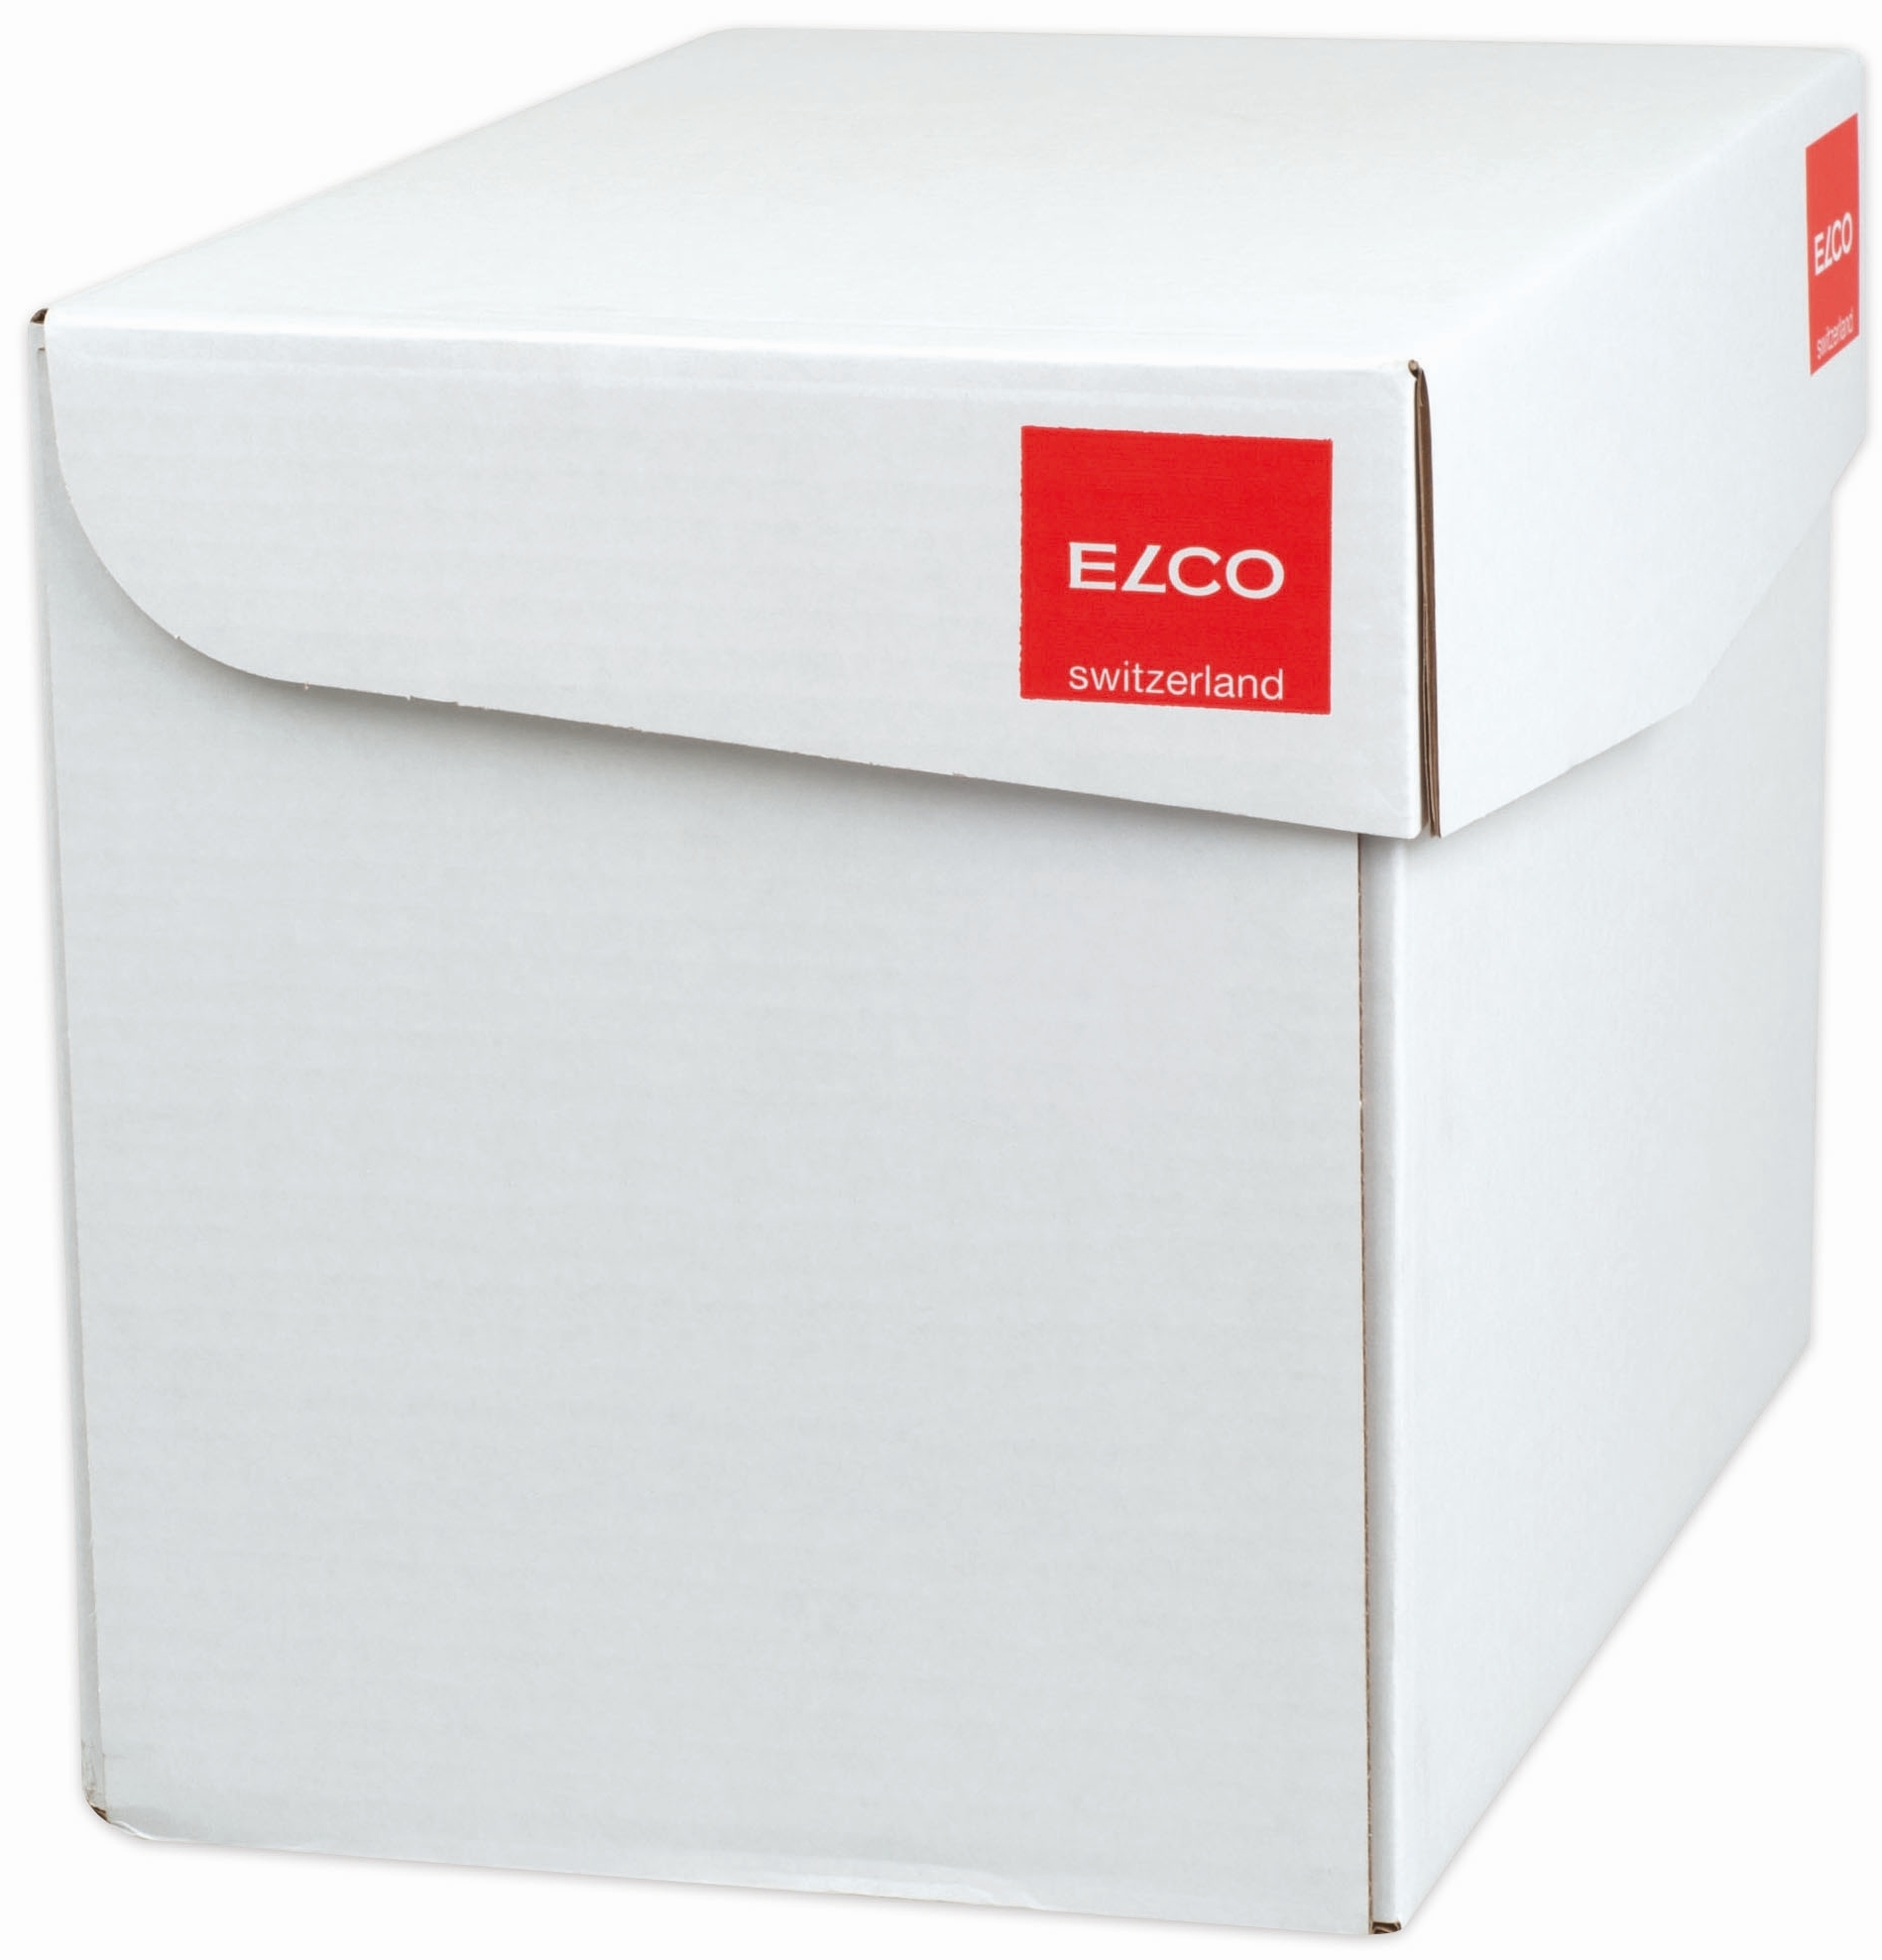 ELCO Couvert Security C4 33882 opaque 120g 250 Stk.